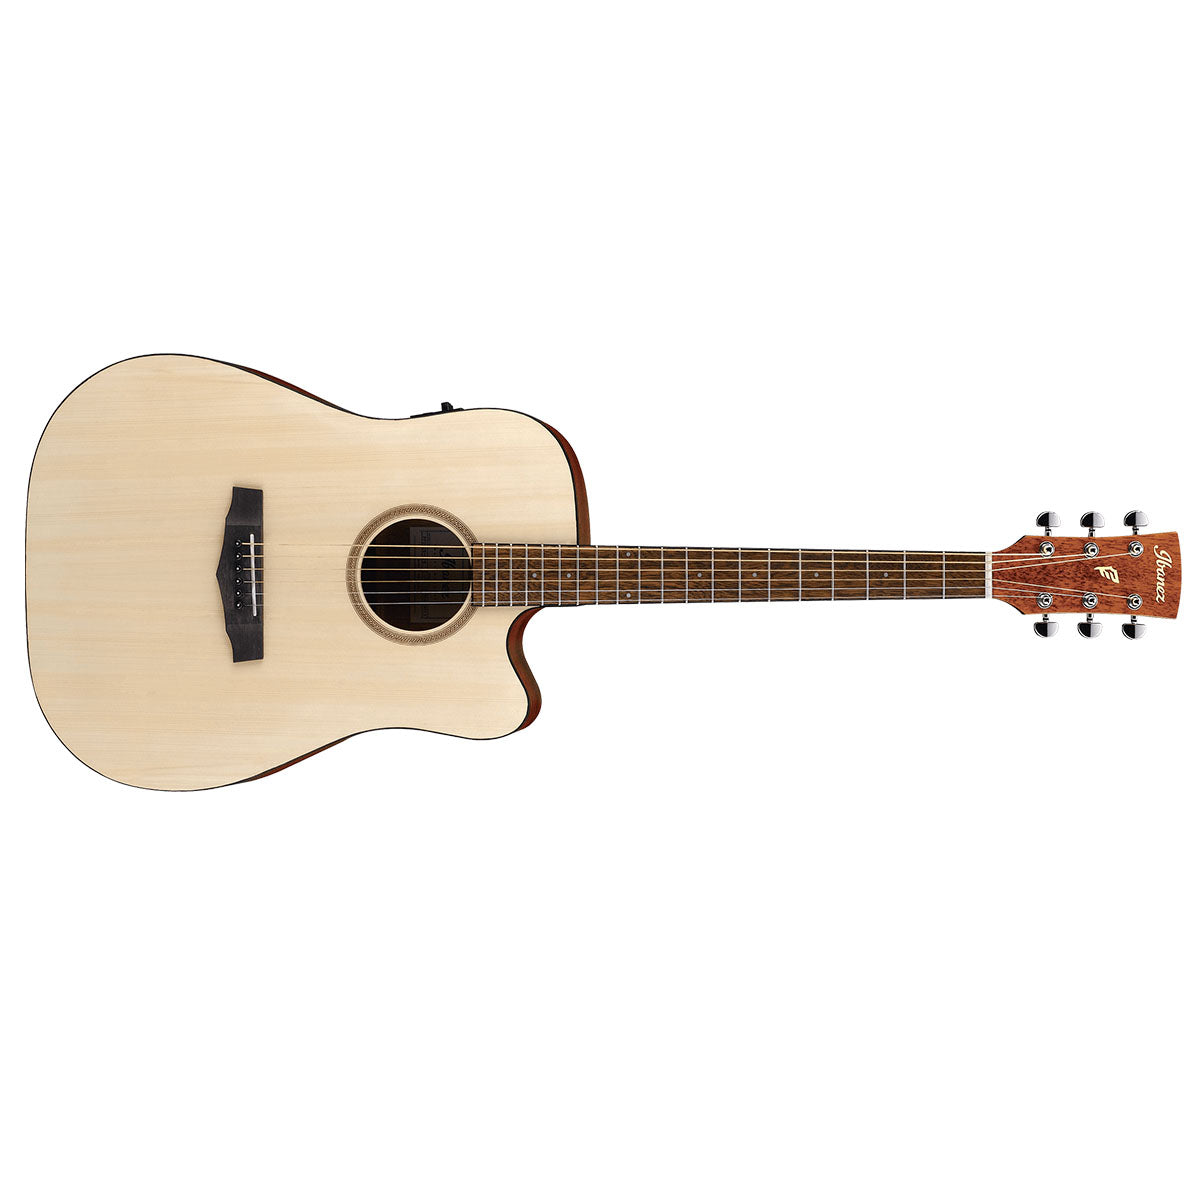 Ibanez PF10CE Acoustic Guitar Dreadnought Open Pore Natural w/ Pickup & Cutaway - PF10CEOPN